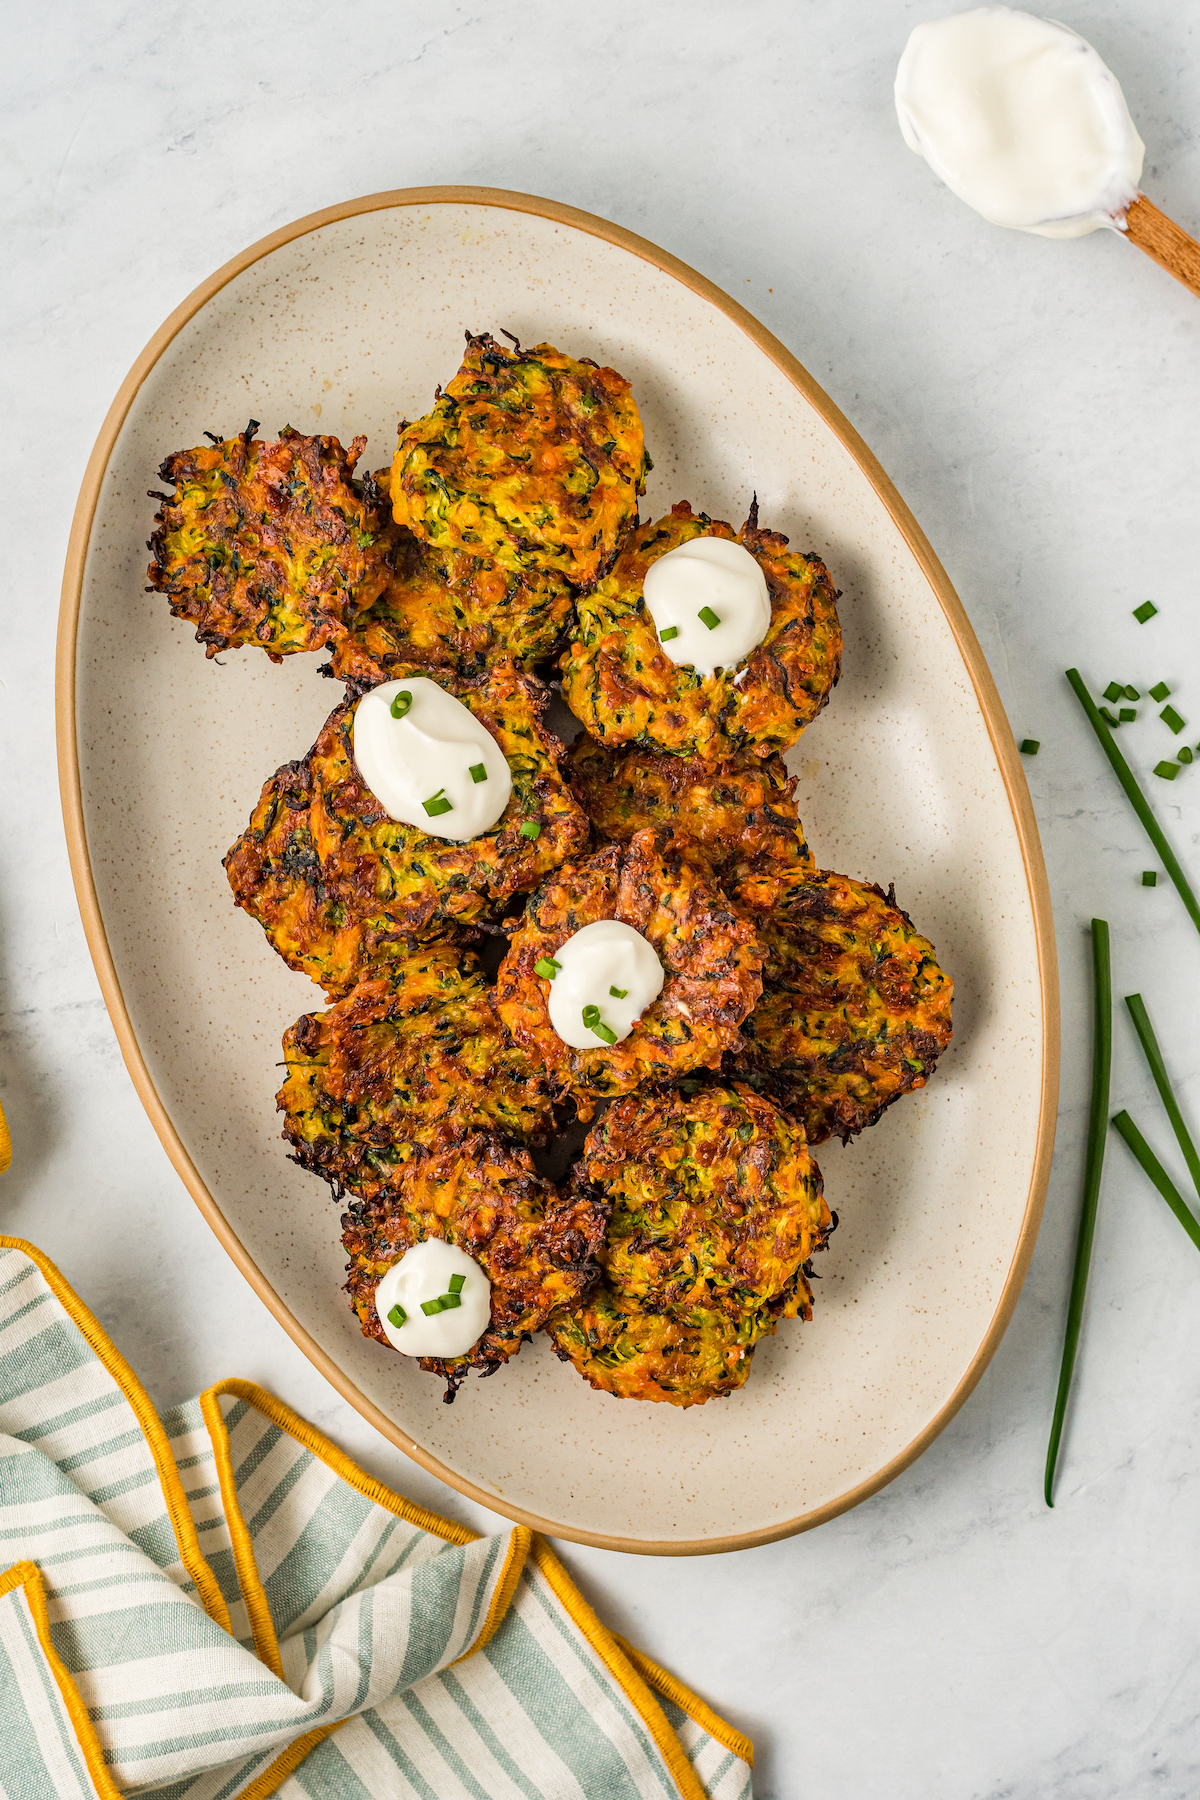 A platter of homemade zucchini fritters, garnished with dollops of sour cream and fresh herbs.